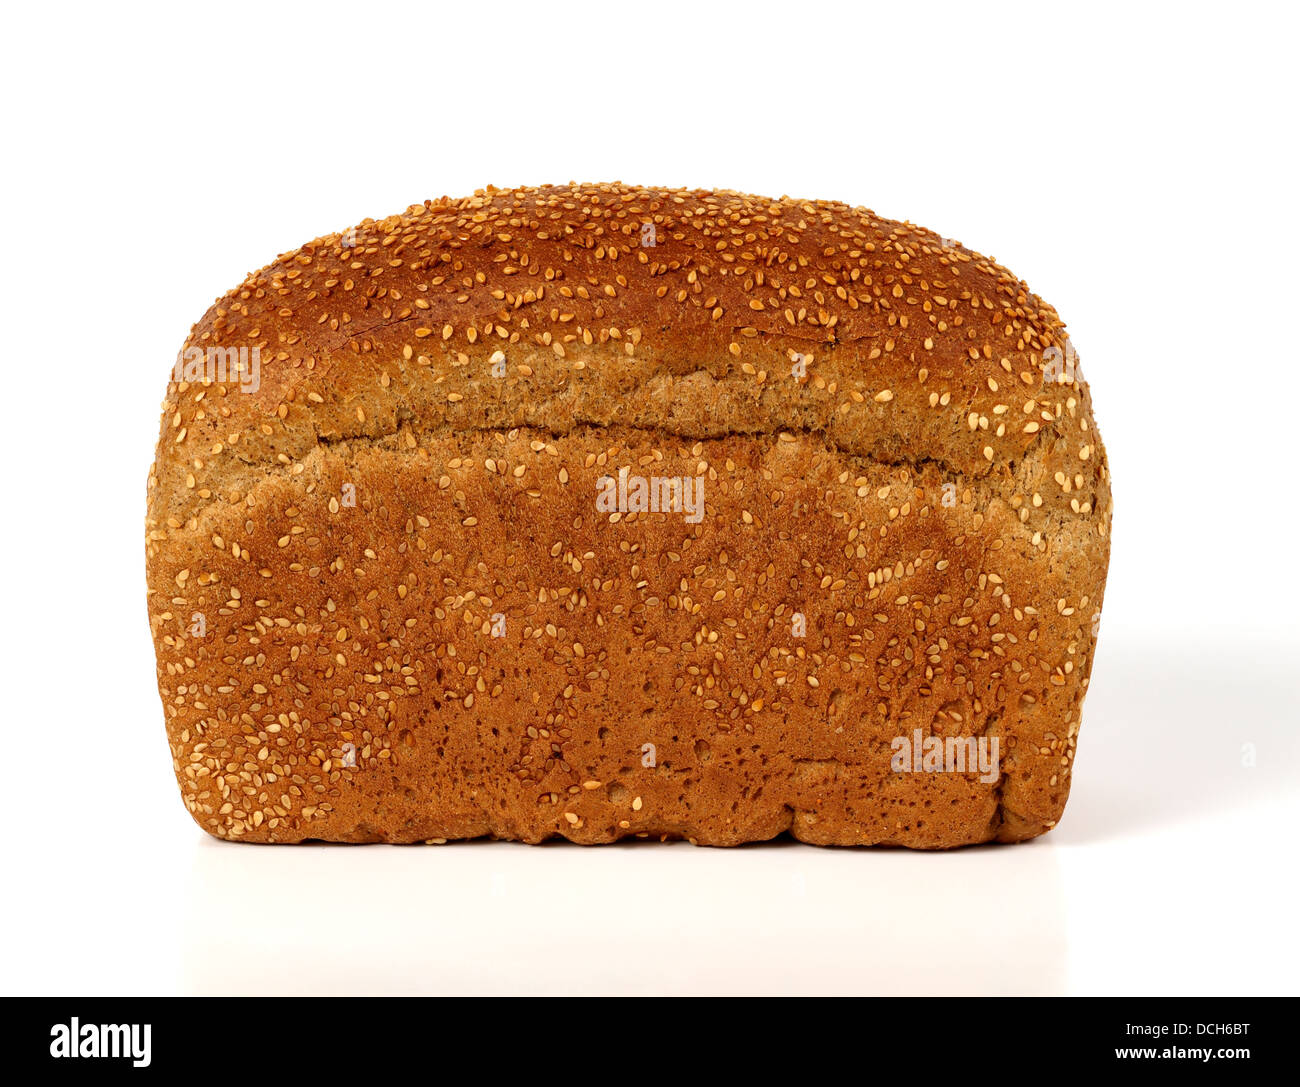 Loaf of rye bread on white Stock Photo